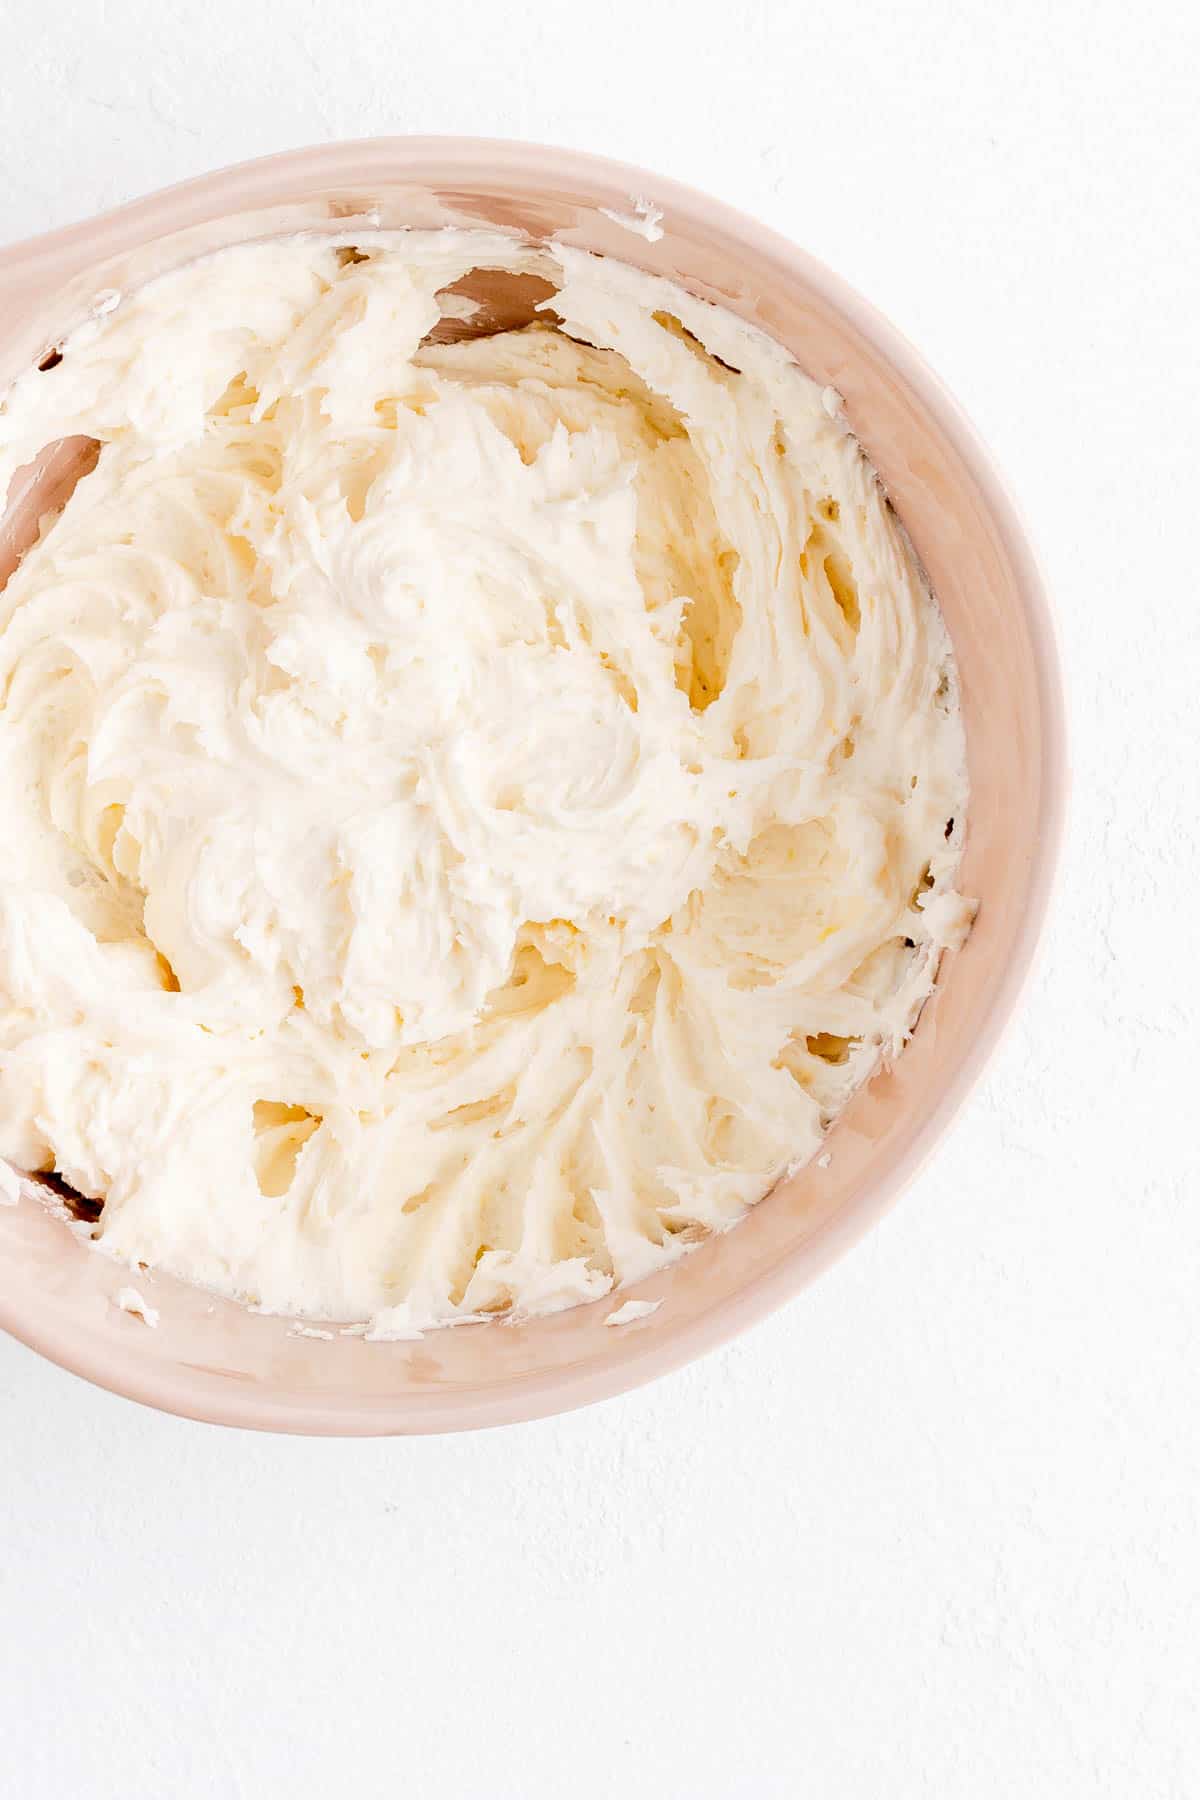 prosecco butter cream whipped in a tan bowl on white background.